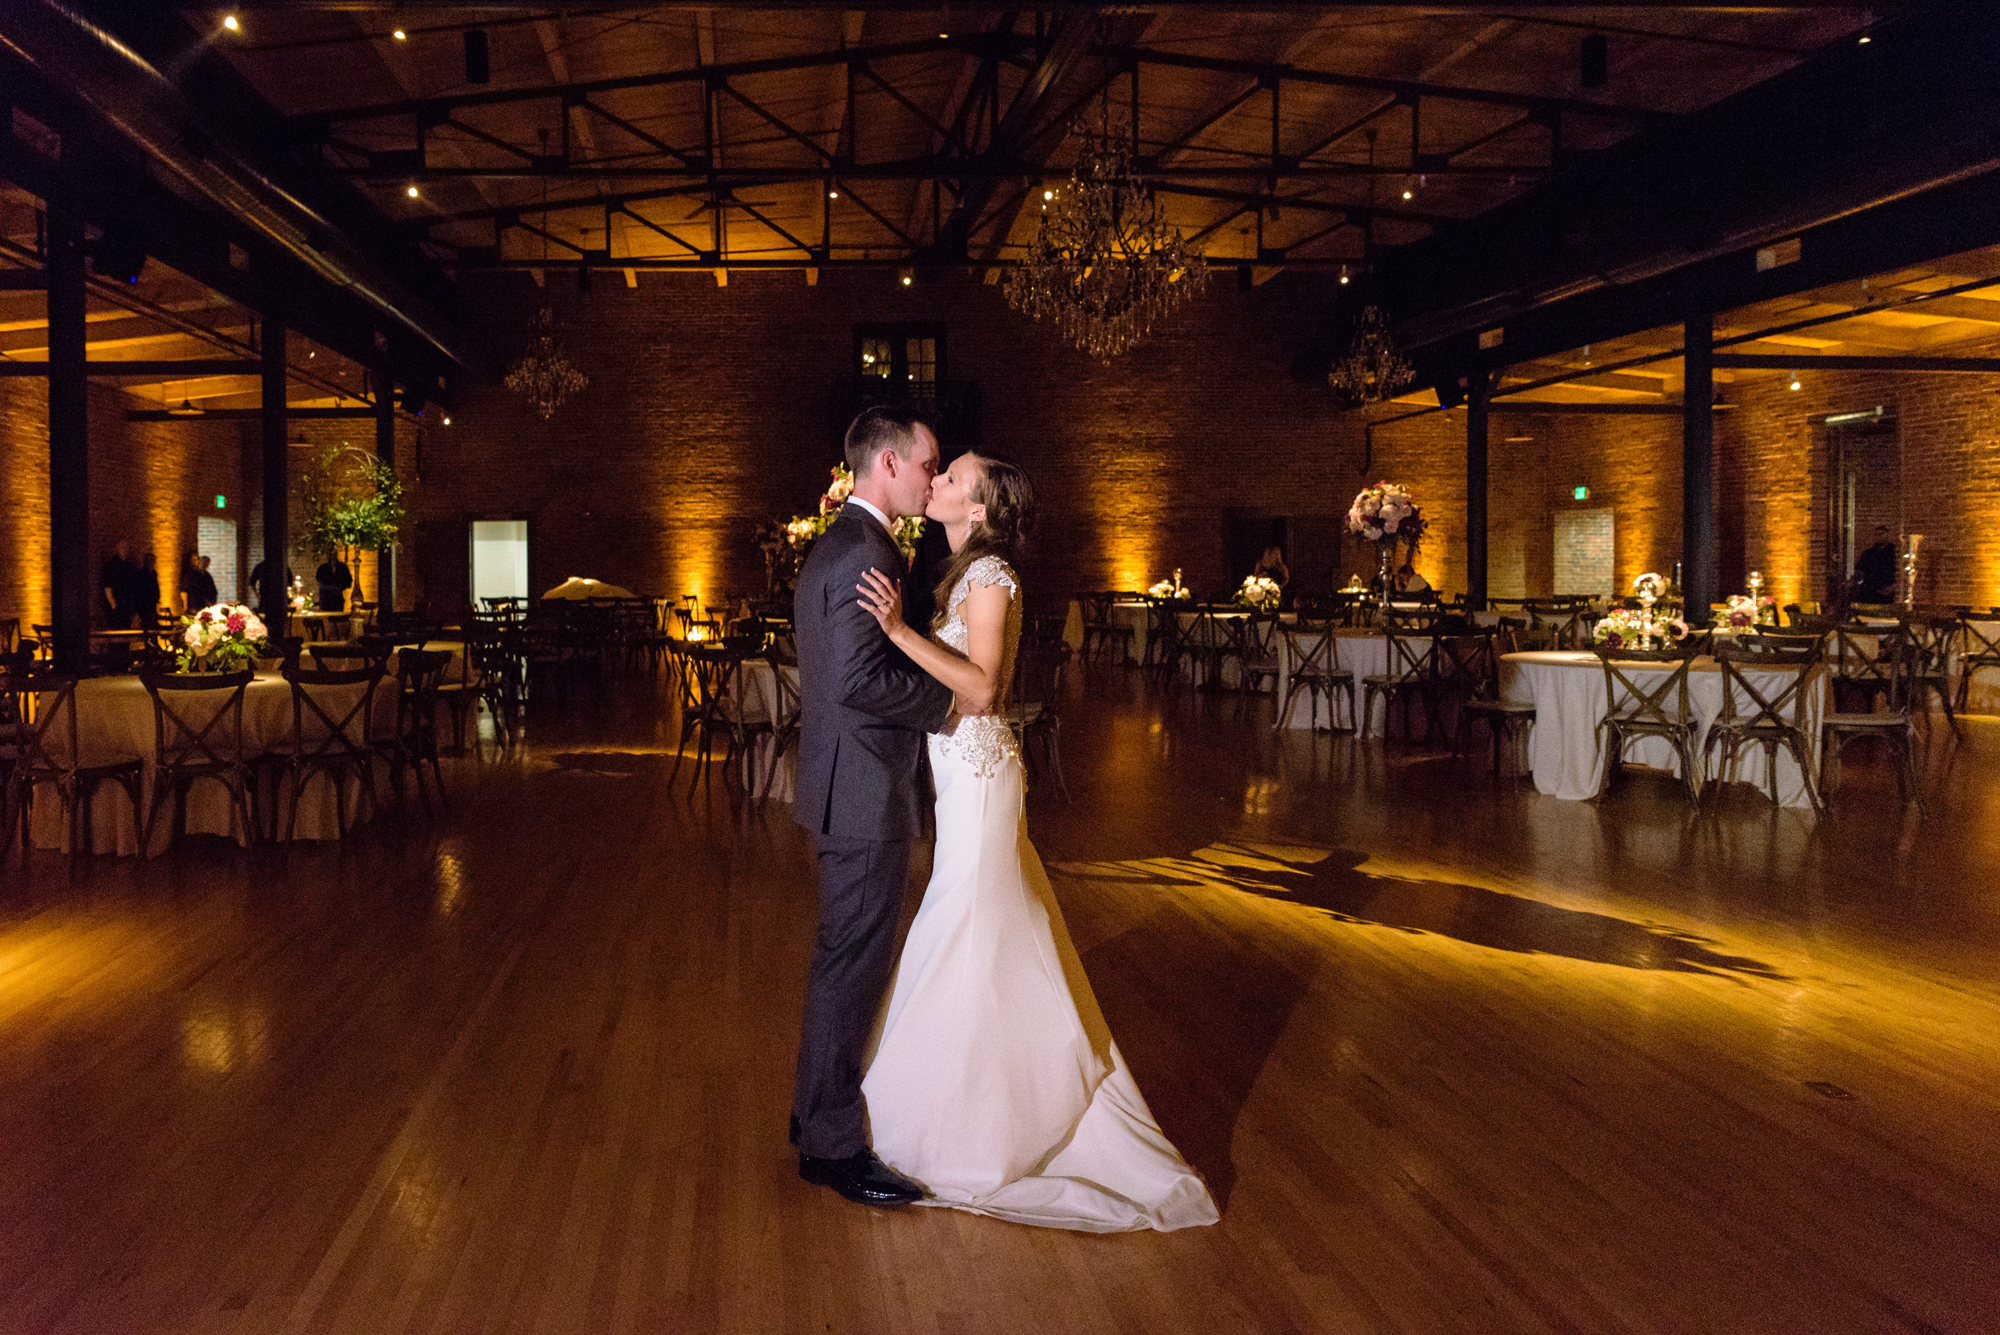 Bride & Groom's private last dance at a Wedding Reception at the Armory